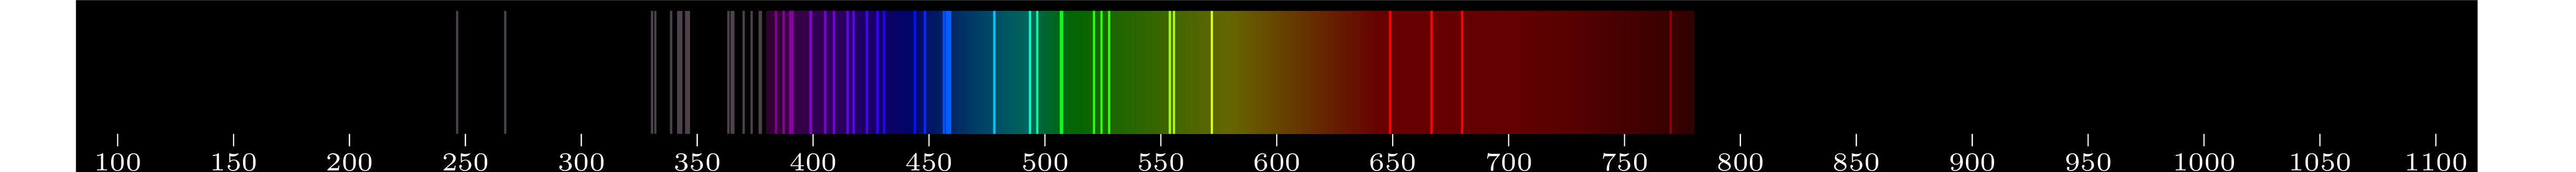 emmision spectra of element Yb